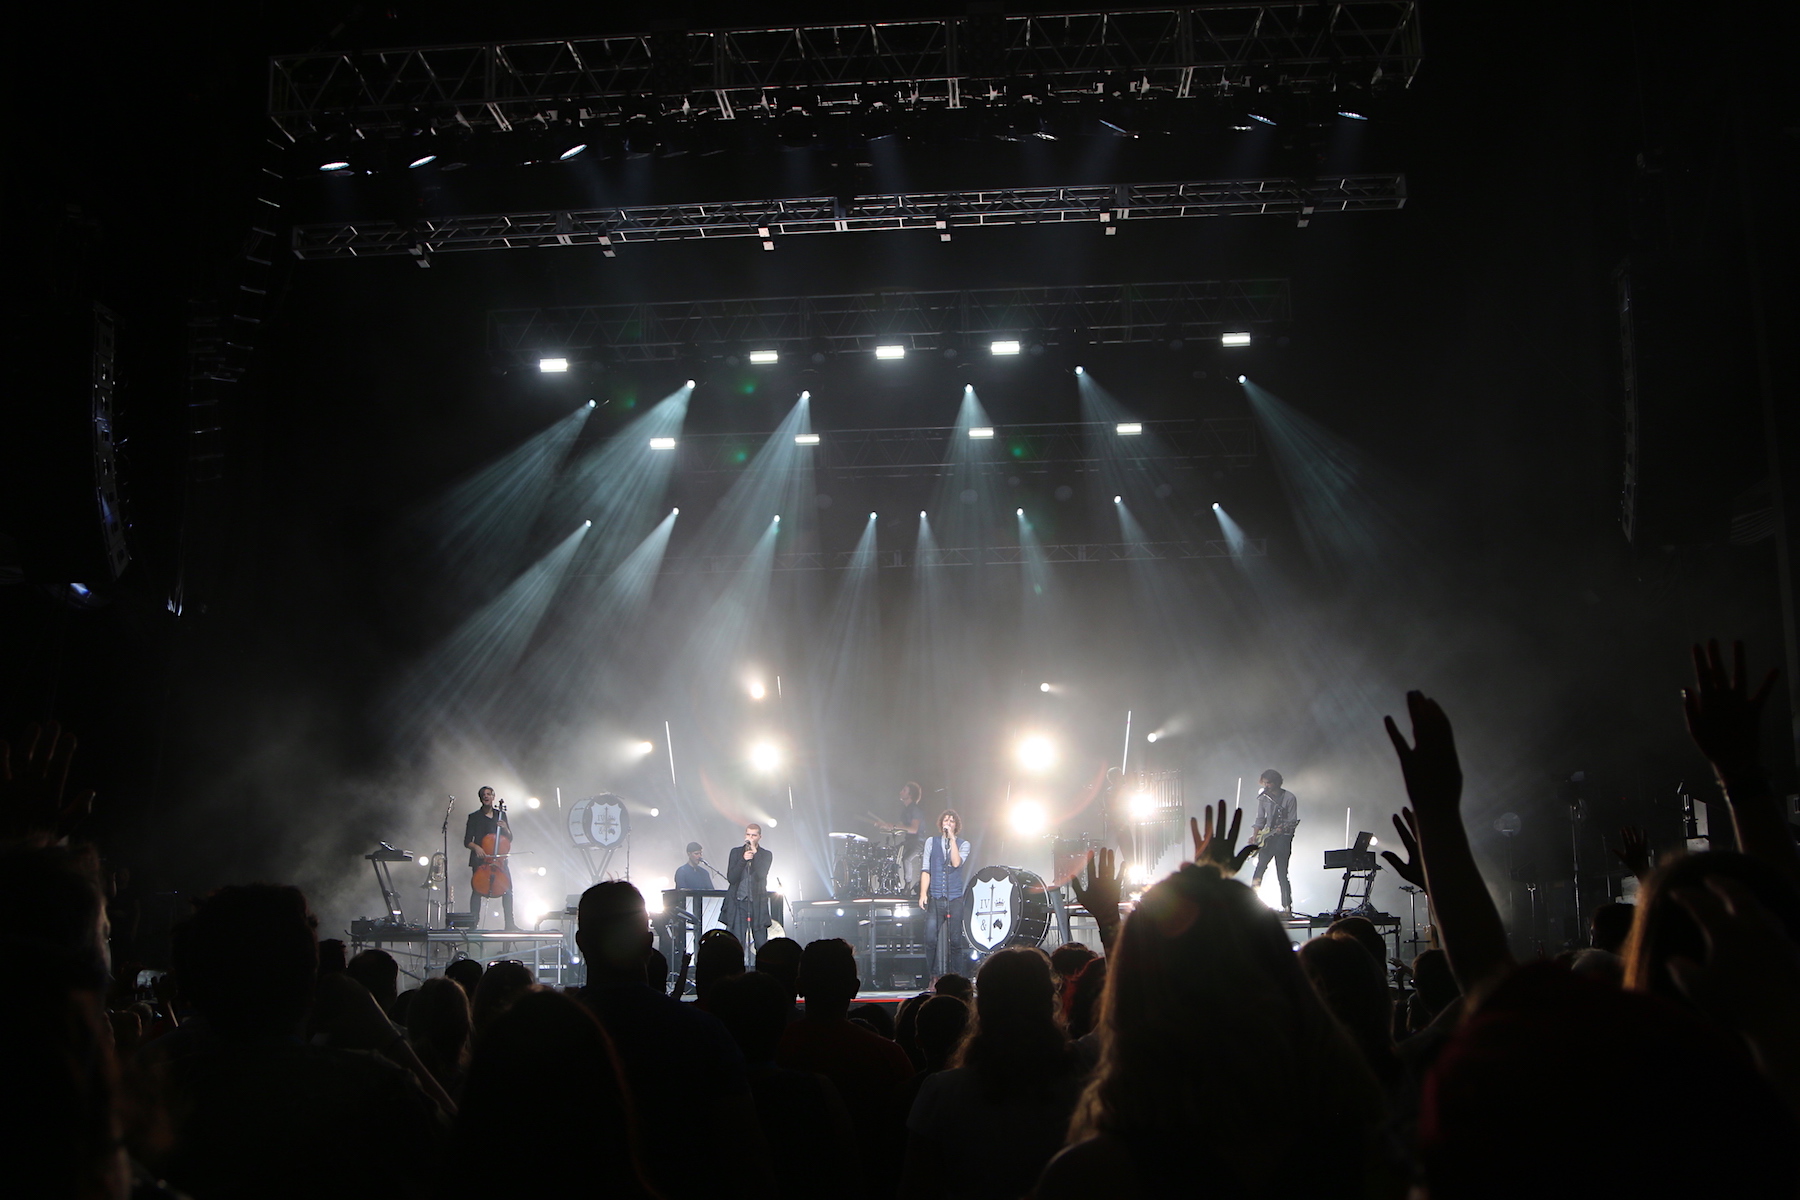 for KING & COUNTRY headlined the 2016 Kingdom Bound Festival. (Submitted images)